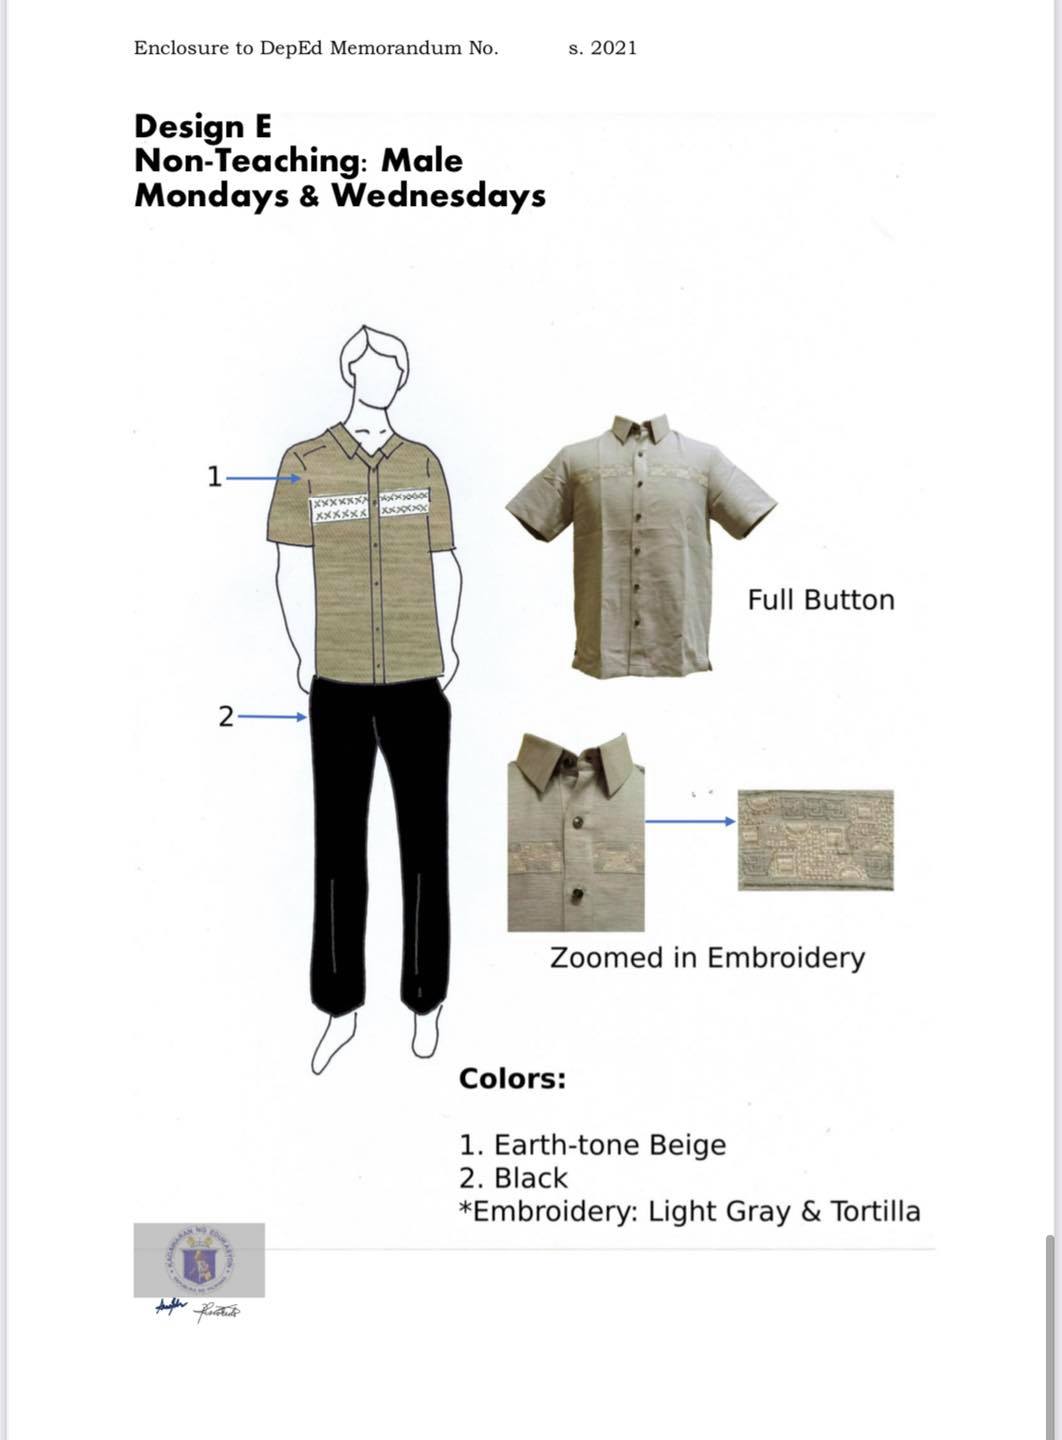 DepEd National Uniform Design E for Male Non-Teaching Personnel (Mondays and Wednesdays)